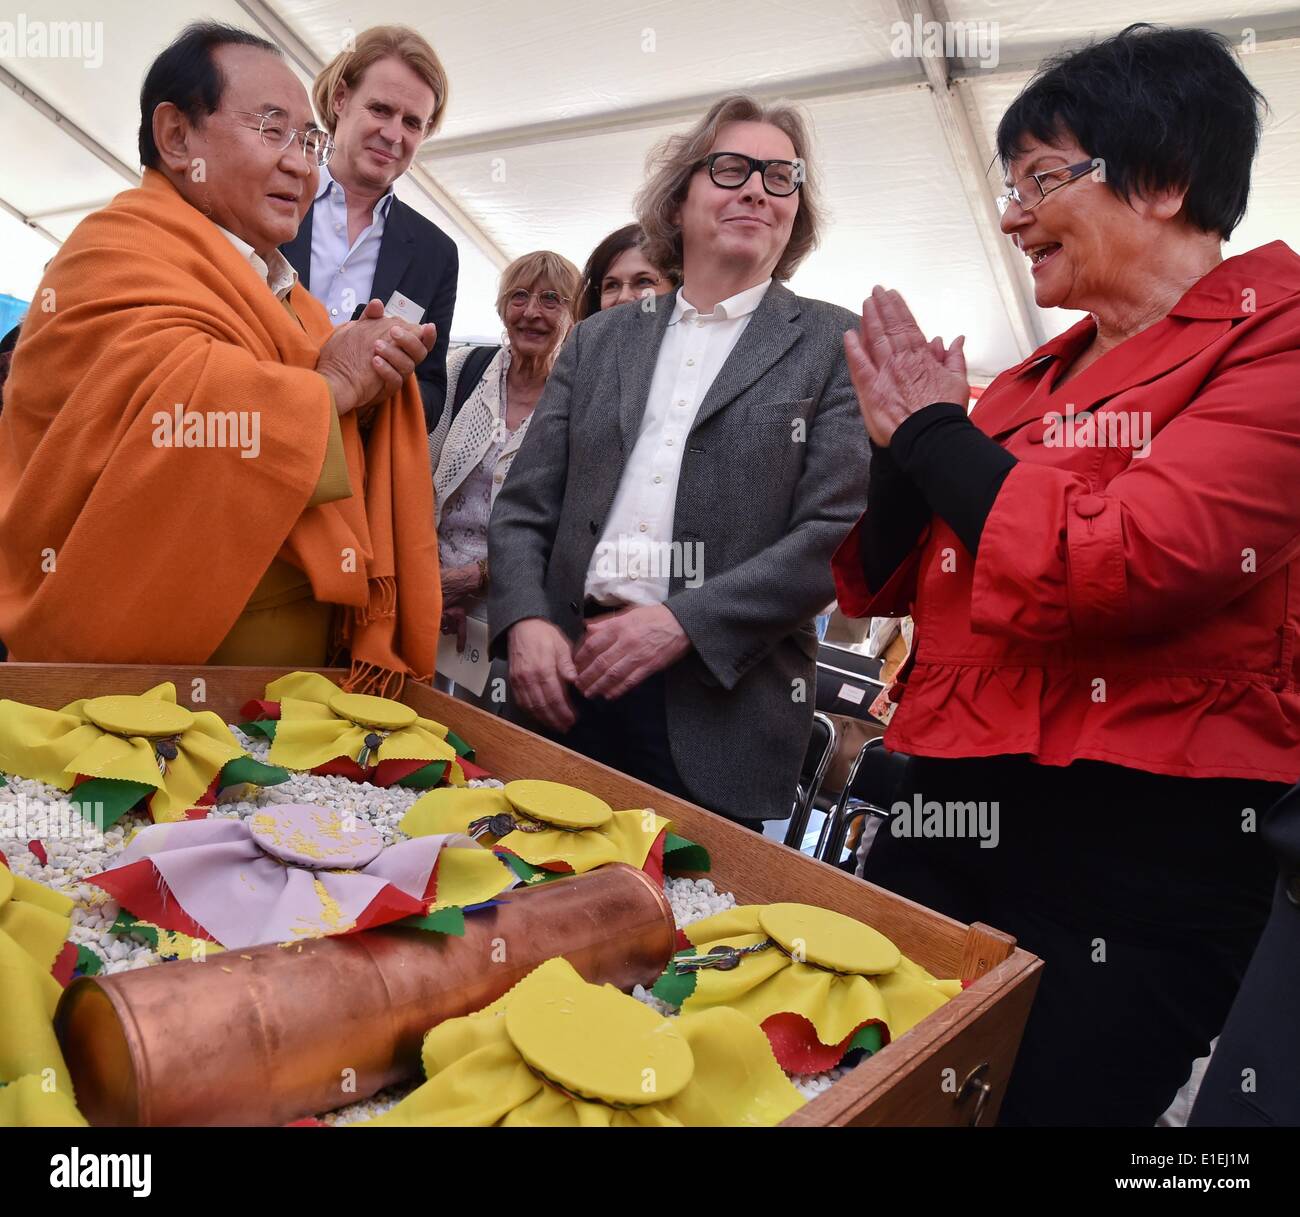 Sogyal Rinpoche (L), Tibetan meditation master and teacher of the Nyingma tradition of Tibetan Buddhism, blesses vessels next to (R-L) mayor of Bad Saarow Anke Hirschmann, architect Karl Hufnagel and chairman of the Tertoen Sogyal Foundation Heinz Siepmann during the groundbreaking ceremony for a Buddhist residential project 'Spiritual Care Center Germany' in Bad Saarow, Germany, 02 June 2014. The housing project and Spiritual Care Centre 'Sukhavati', which costs around six million euros, will receive people in need of care and sick, but also people in a life crisis, regardless of whether they Stock Photo